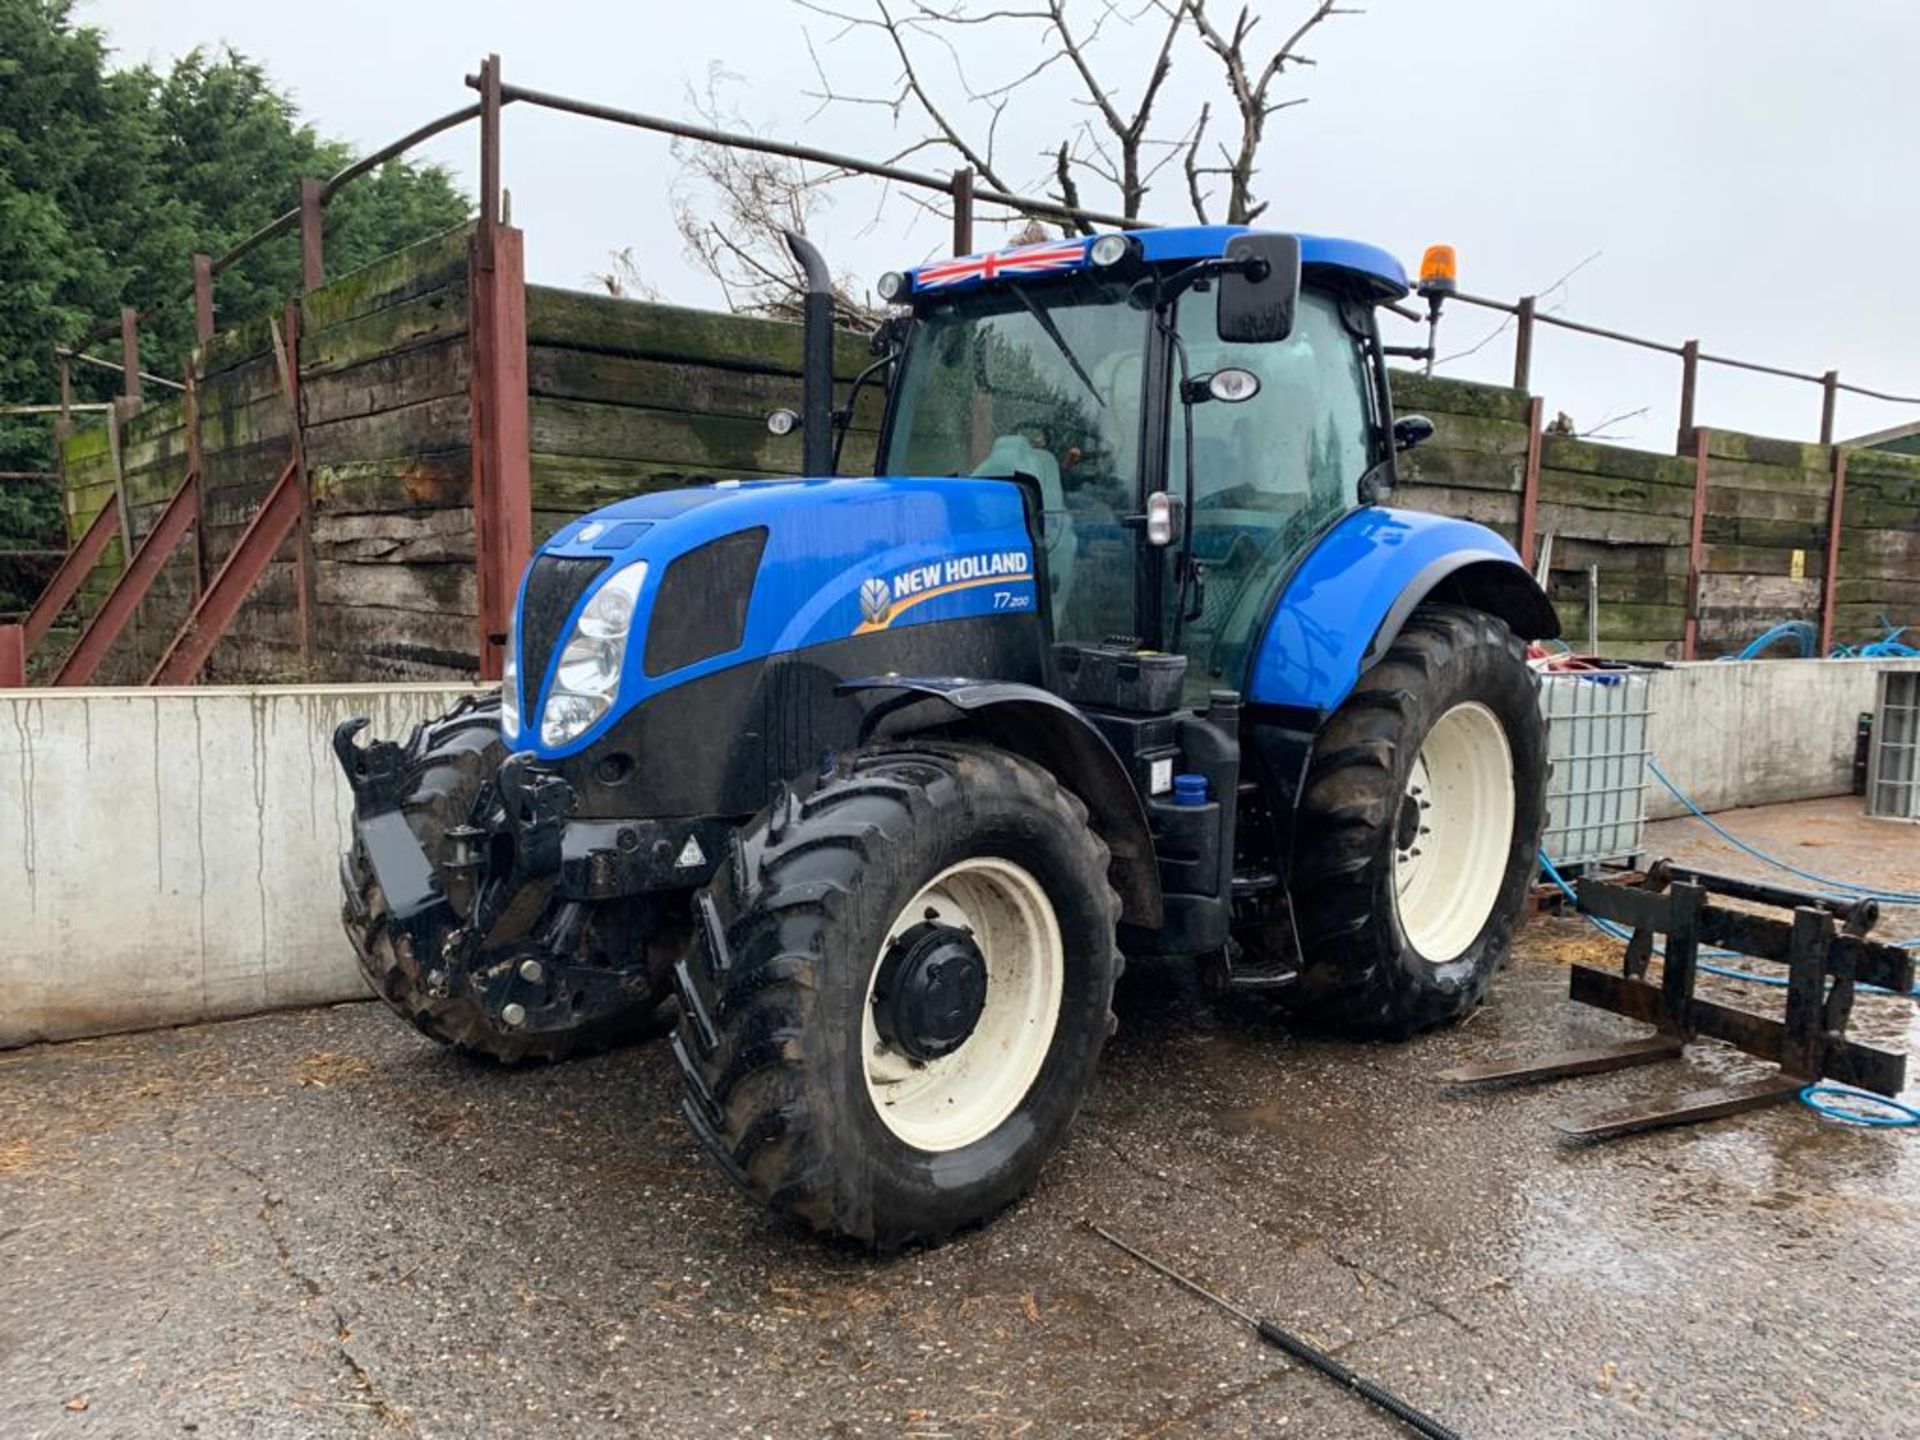 2013/63 REG NEW HOLLAND T7.200 TRACTOR, SHOWING 1 FORMER KEEPER, RUNS AND WORKS AS IT SHOULD. - Image 3 of 16